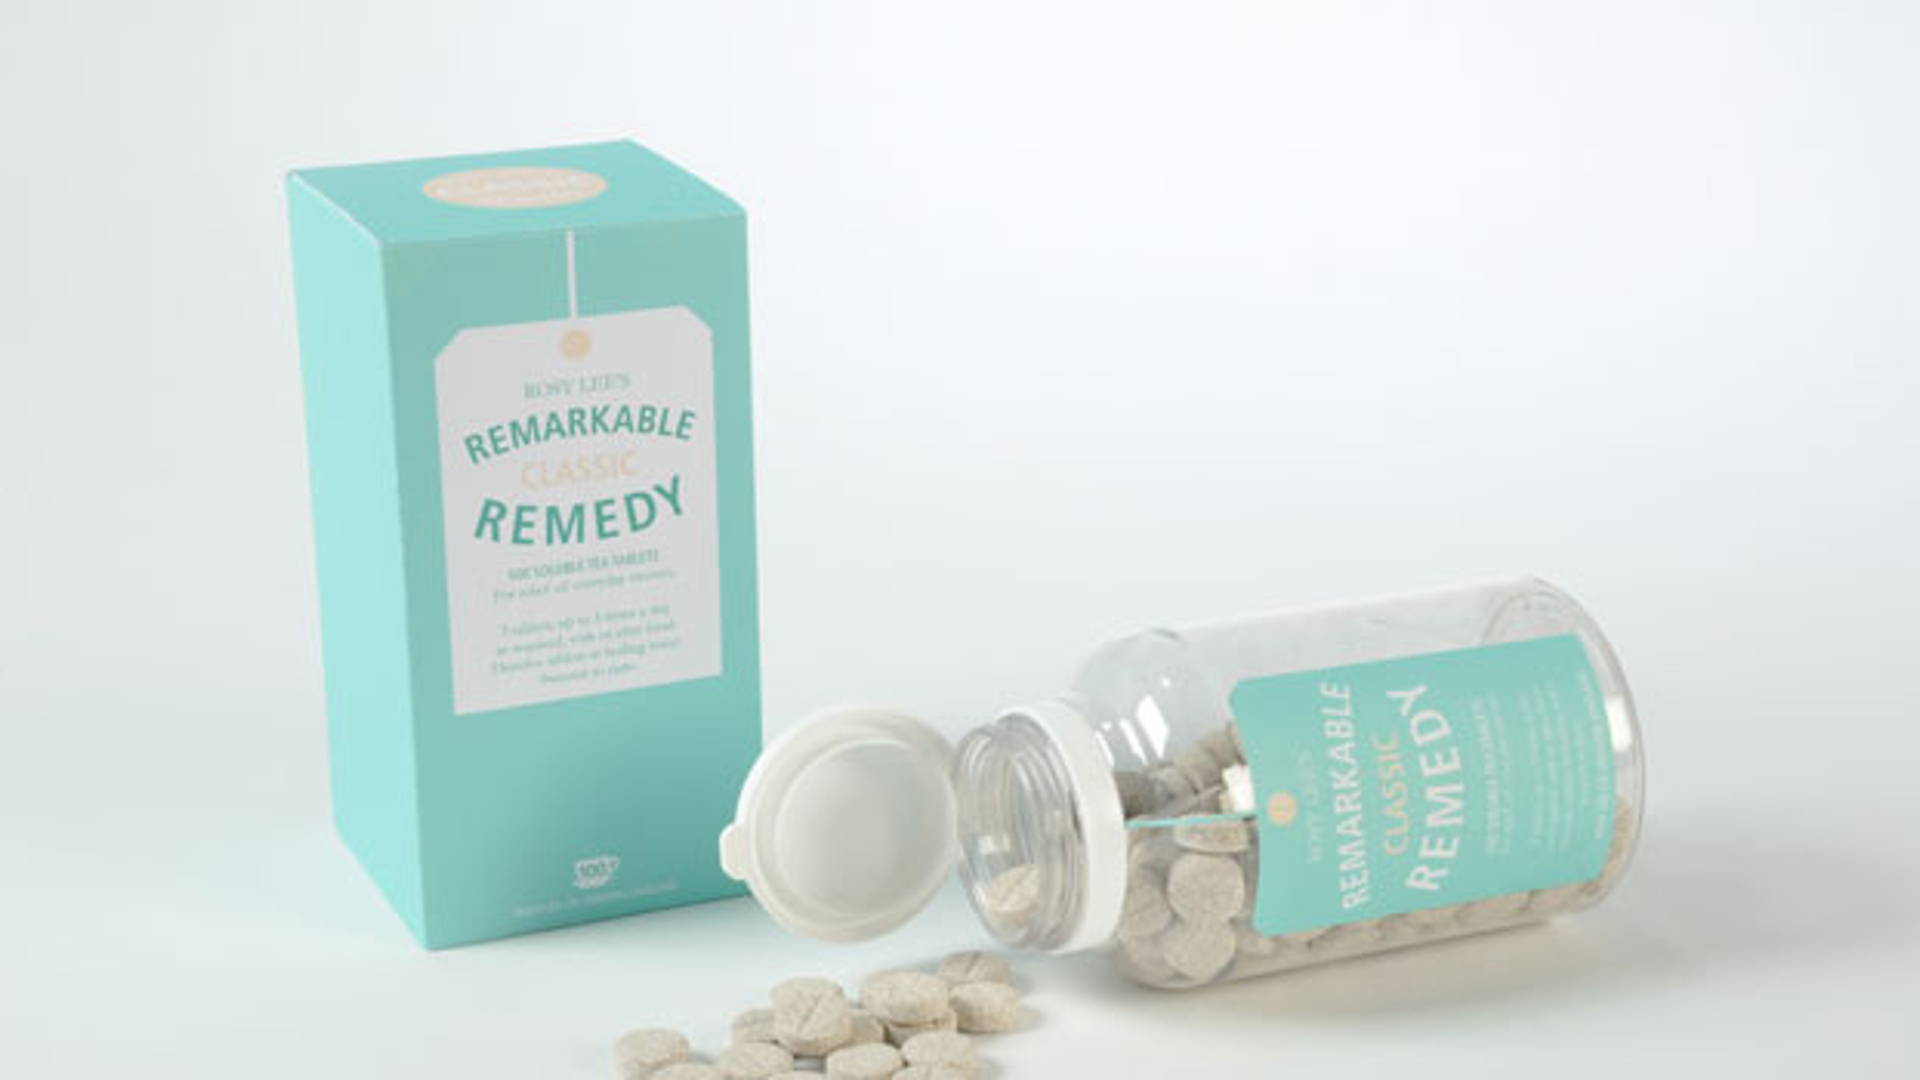 Featured image for Rosy Lee's Remarkable Remedy